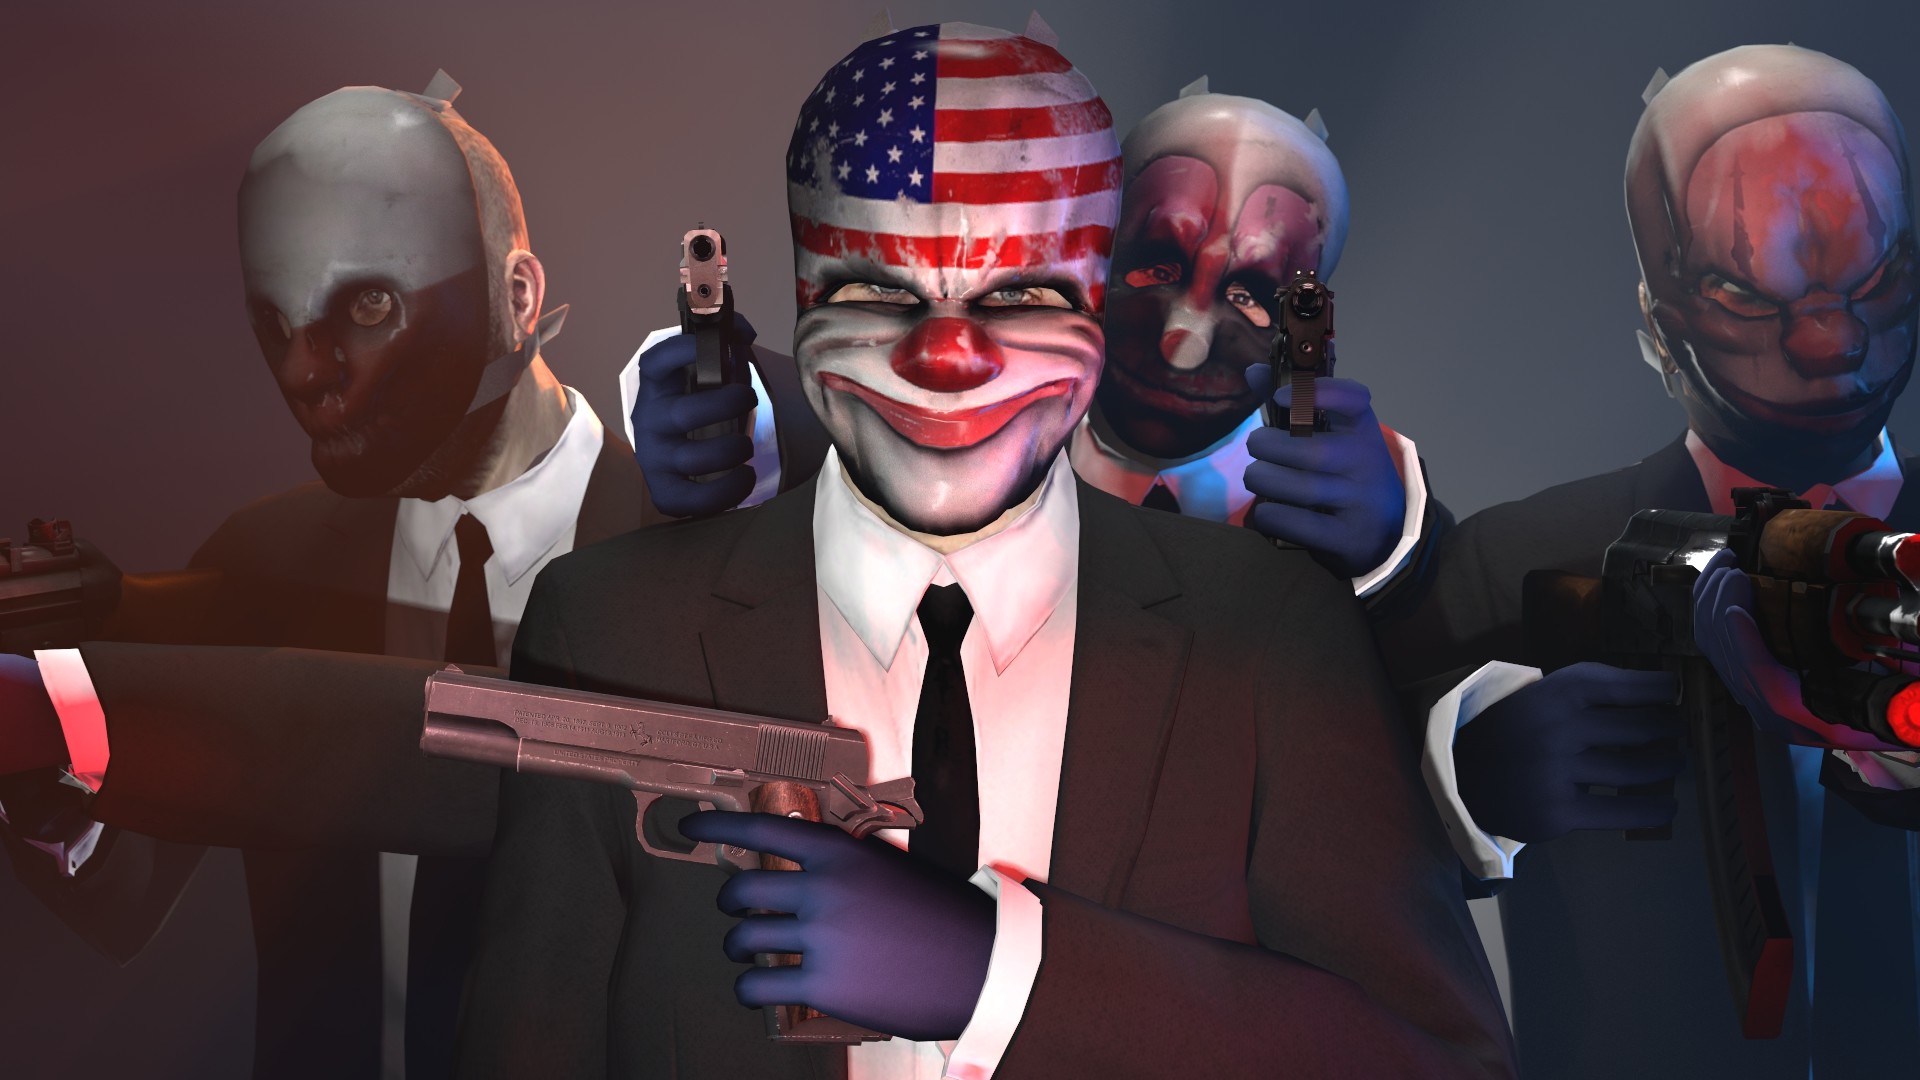 1920x1080 PAYDAY: The Heist by monssavmik PAYDAY: The Heist by monssavmik